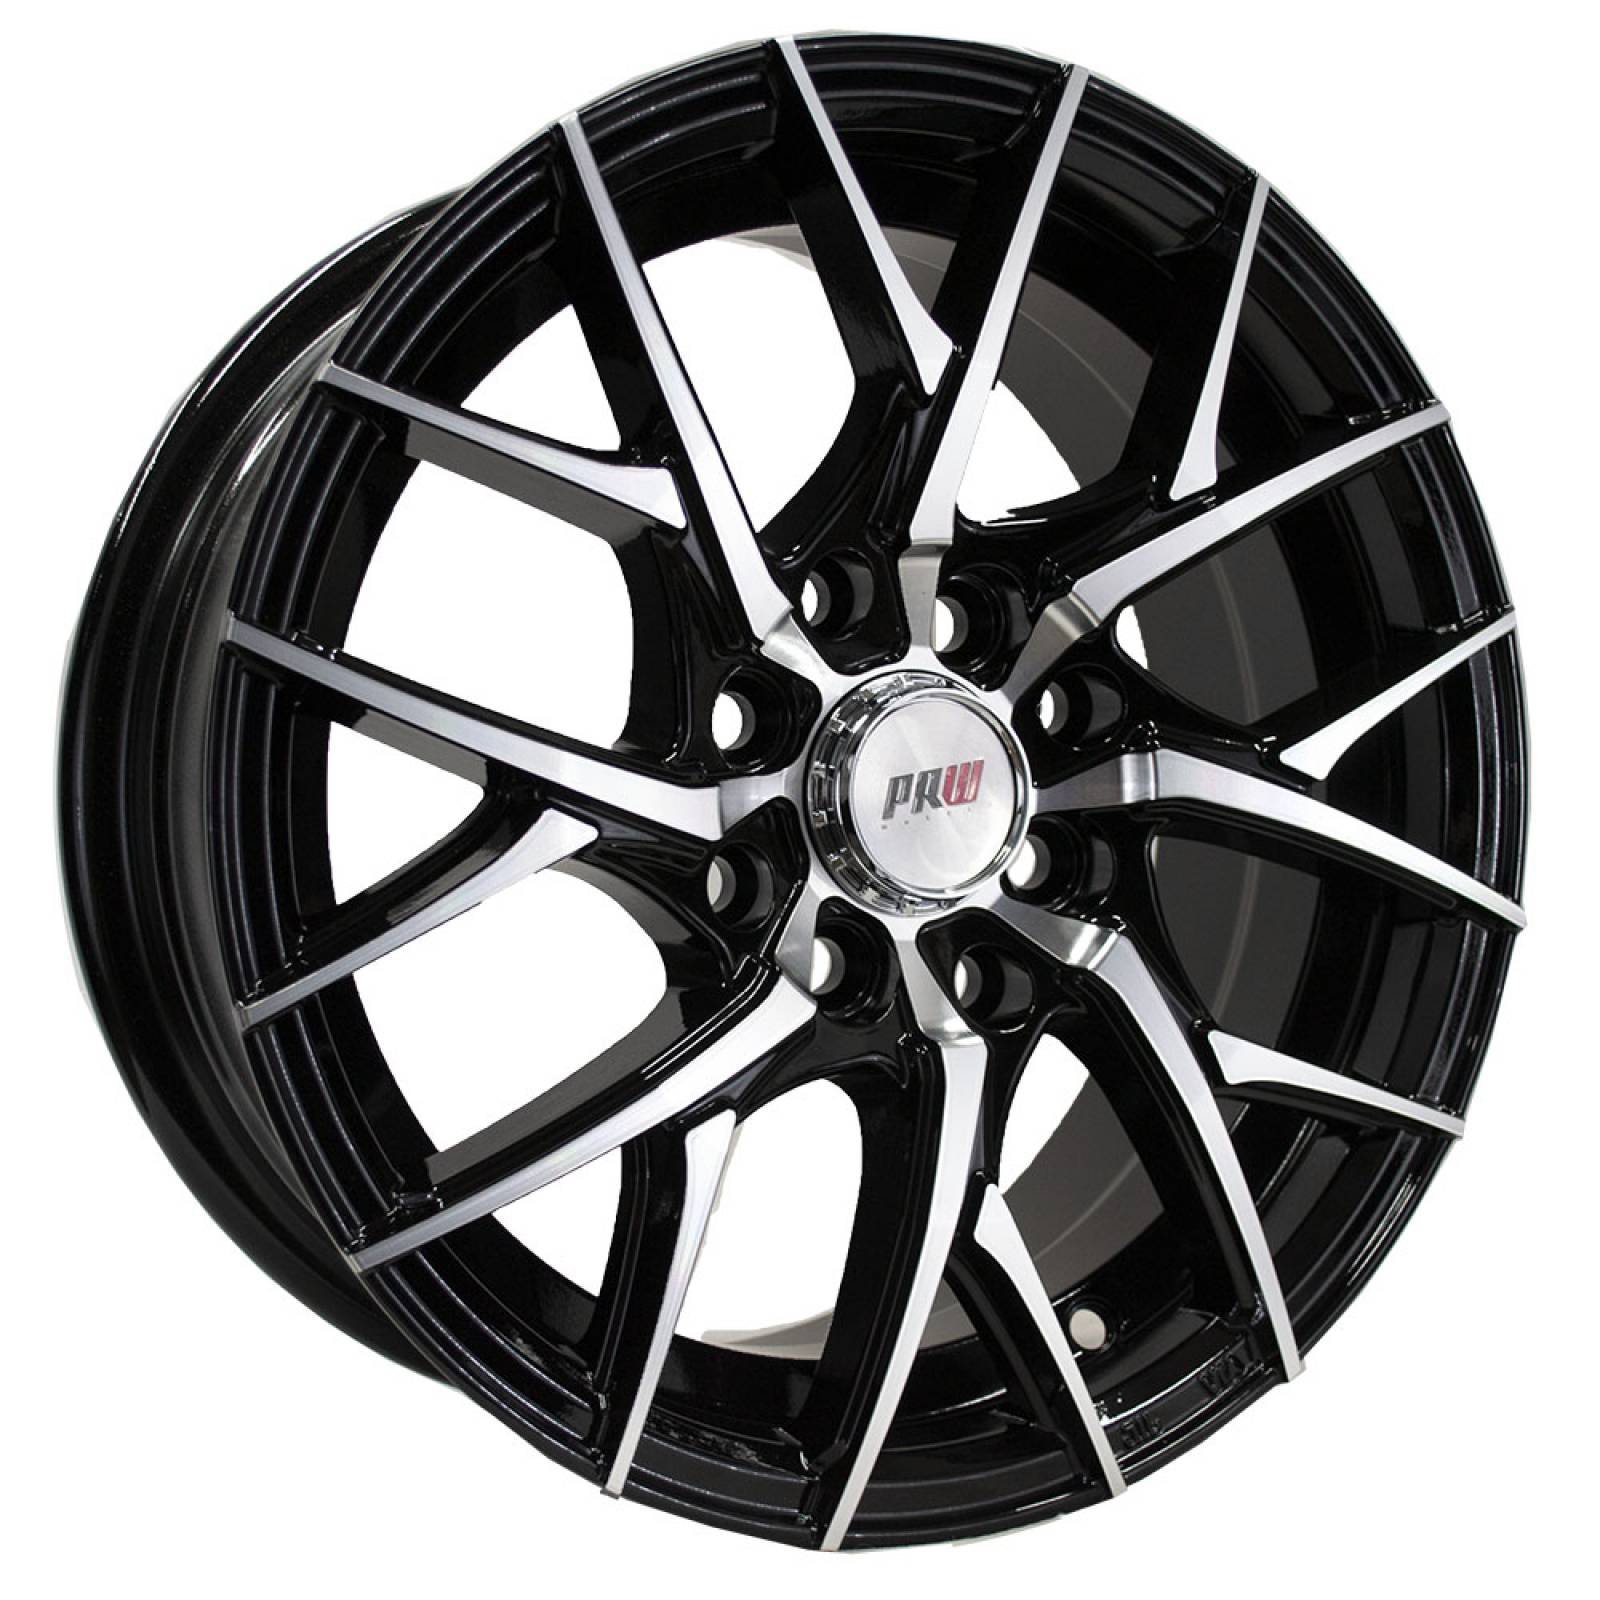 Doupai Face Mod Vip : Rin 15X7 5-100/114.3 PRW Mod: P916 ET35 CB73.1 BLACK ... : In other to ...